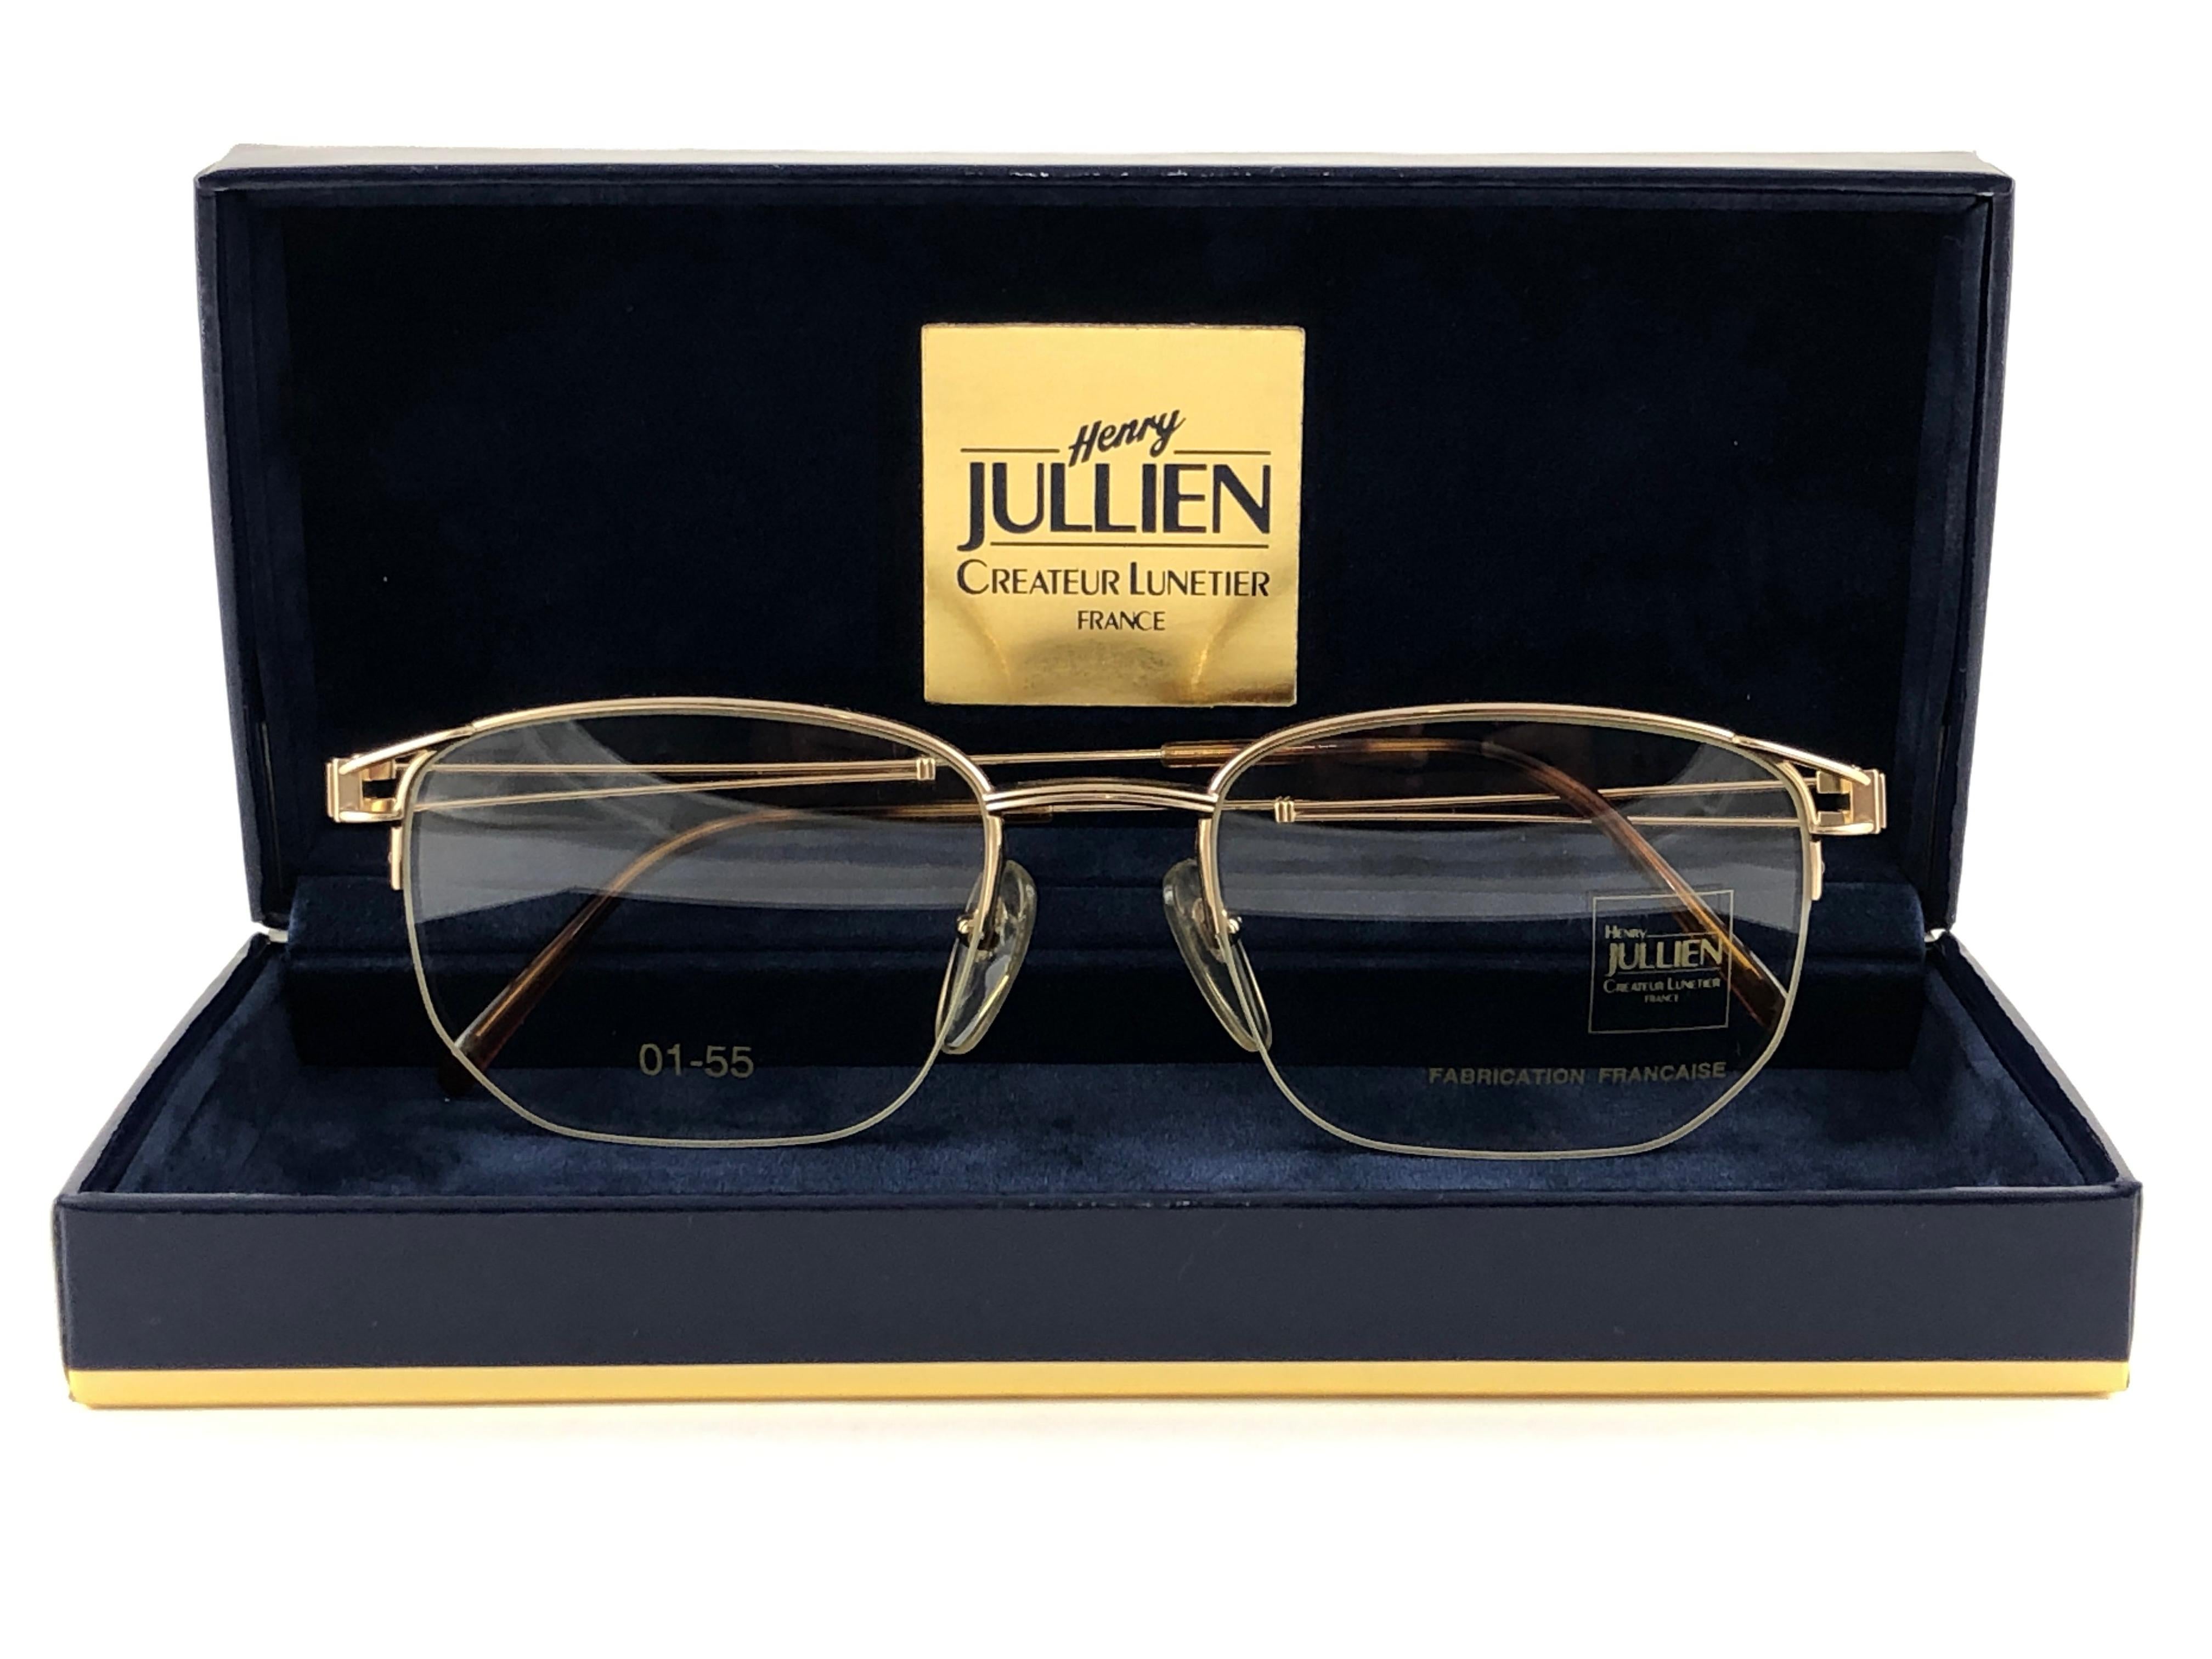 New Henry Jullien gold plated half frame. Ready for prescription lenses.

Made in France
 
Produced and design in 1990's.

This item may show minor sign of wear due to storage.

FRONT 13 CMS
LENS HEIGHT 4 CMS
LENS WIDTH 5.2 CMS